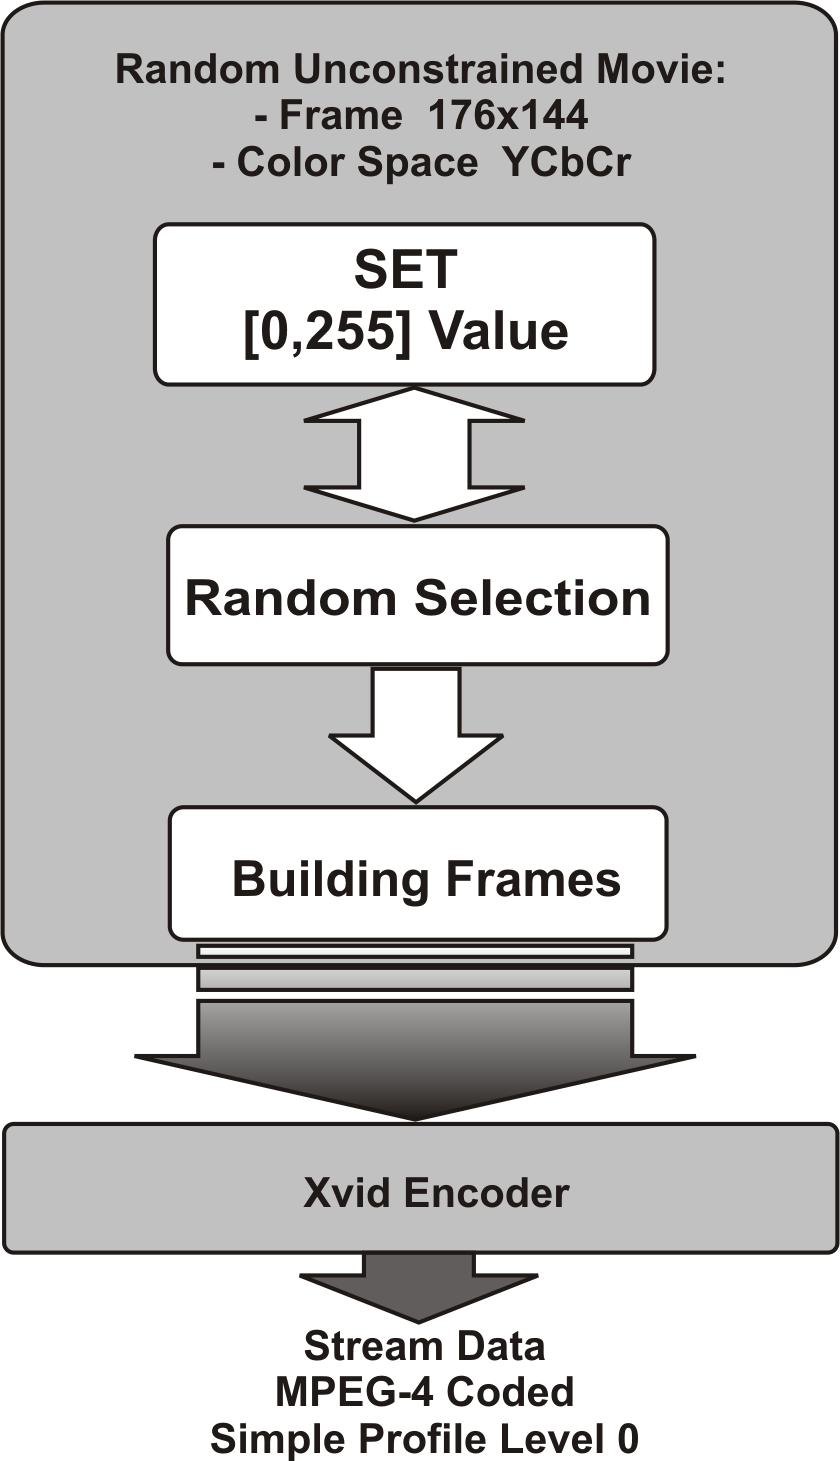 2.1 Random-unconstrained Movie Architecture The architecture of the Random-Unconstrained Movie generator has been designed to be simple, flexible and reusable.